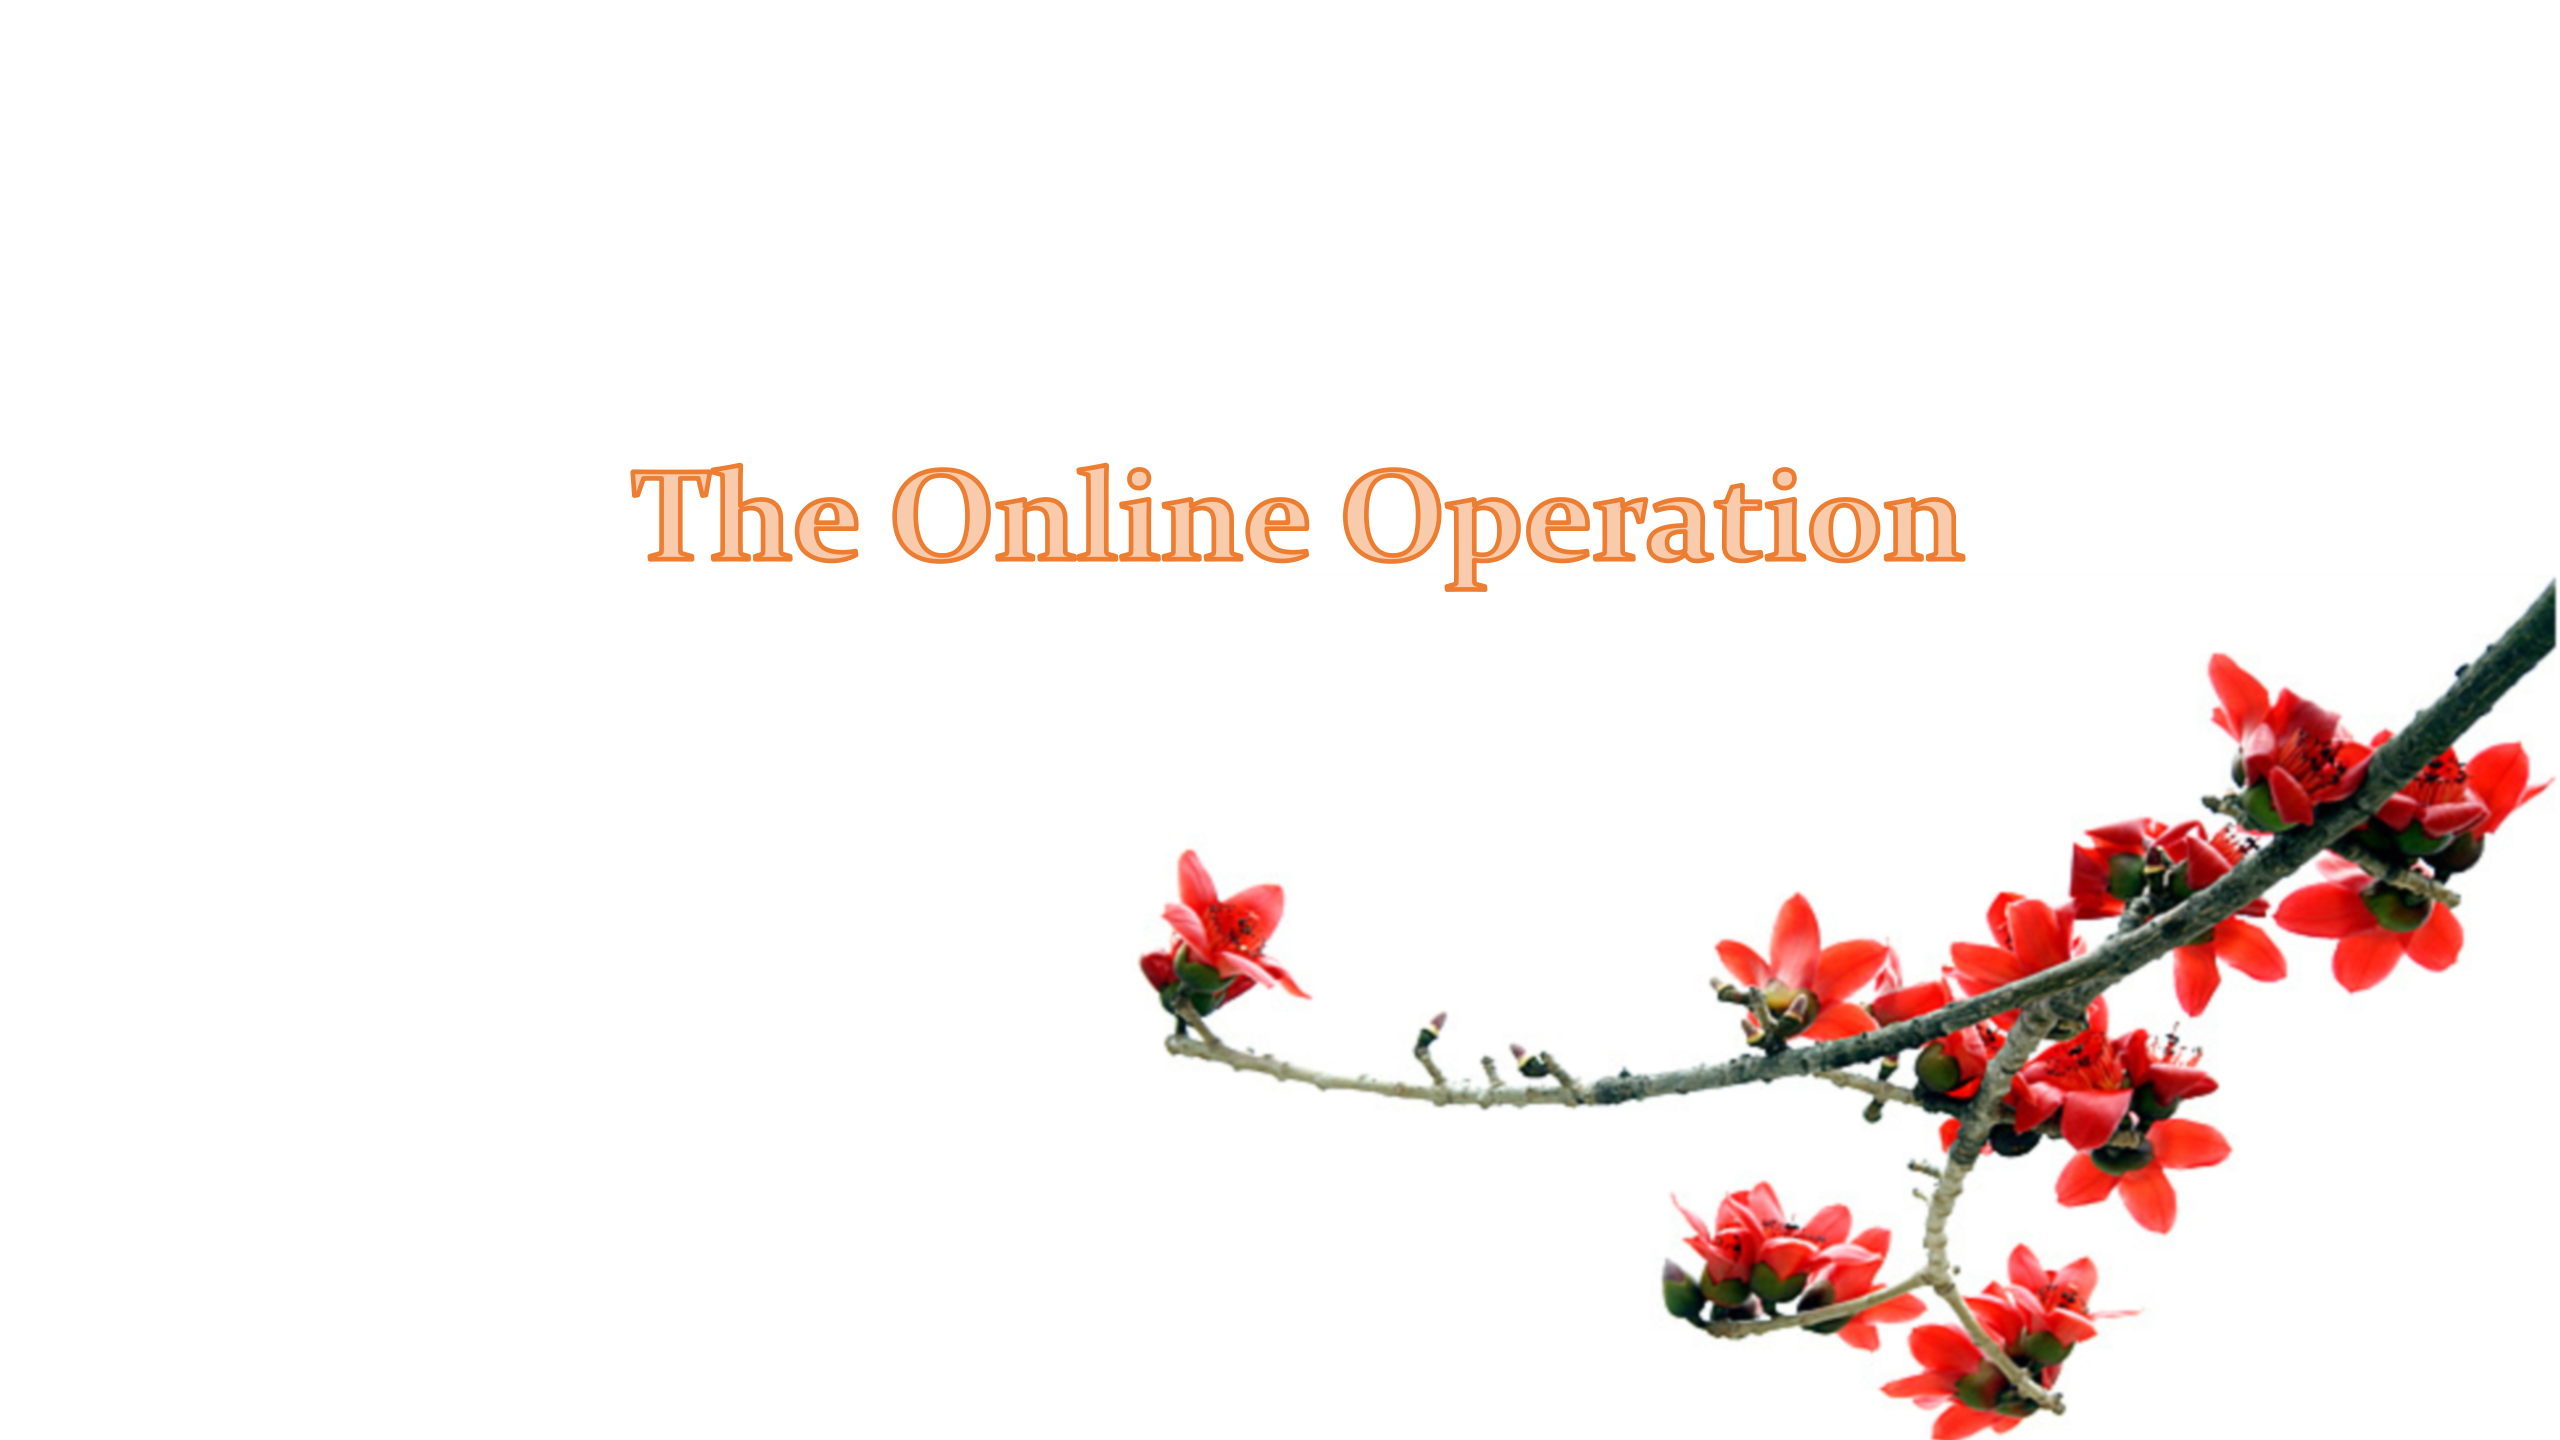 The online operation